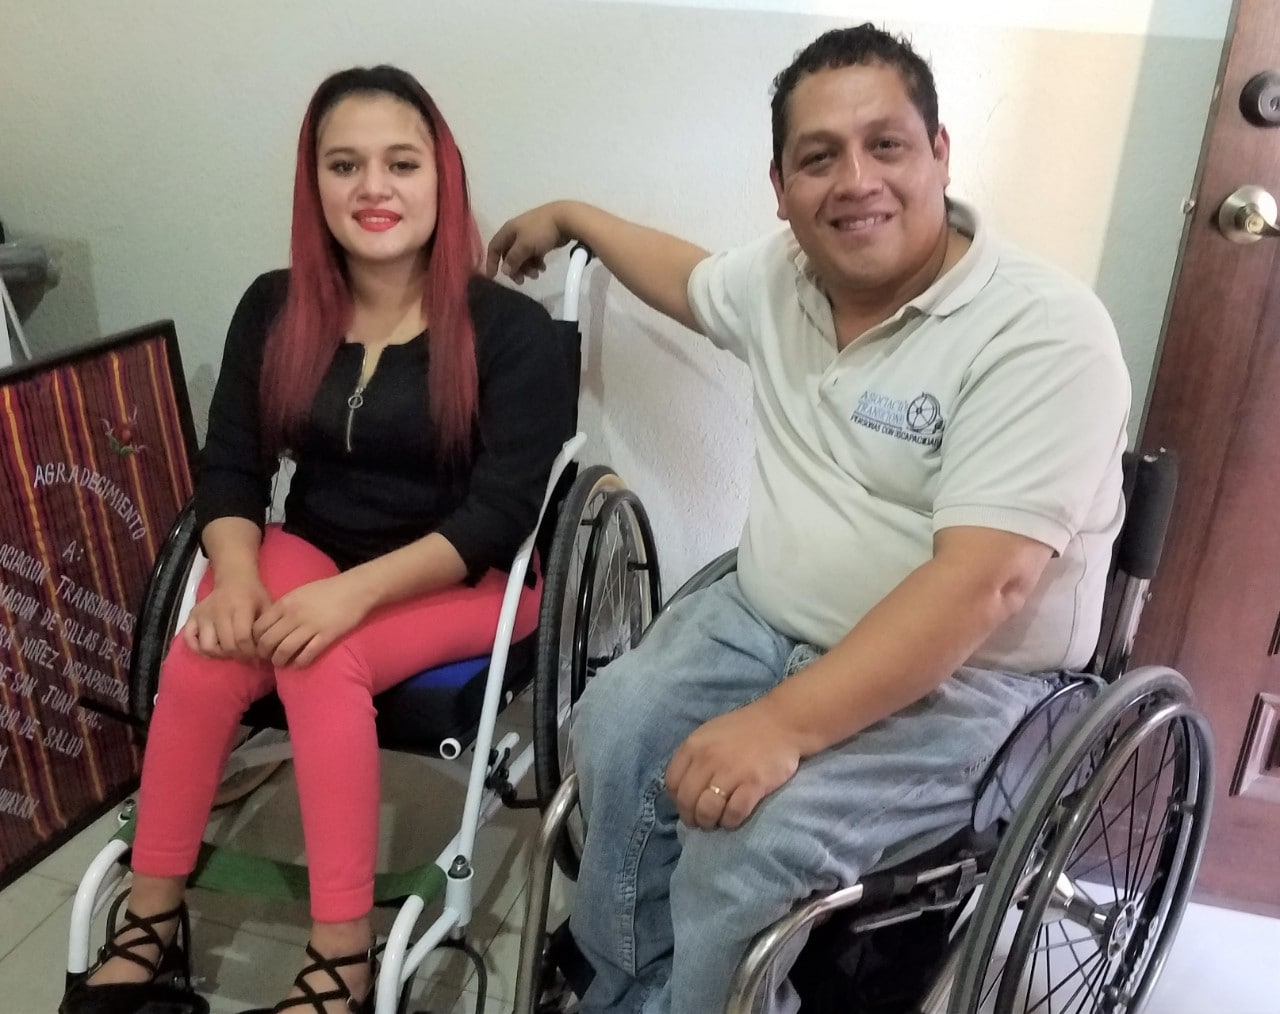 Transitions director Alex Gálvez with gun violence survivor Flory, both seated in wheelchairs